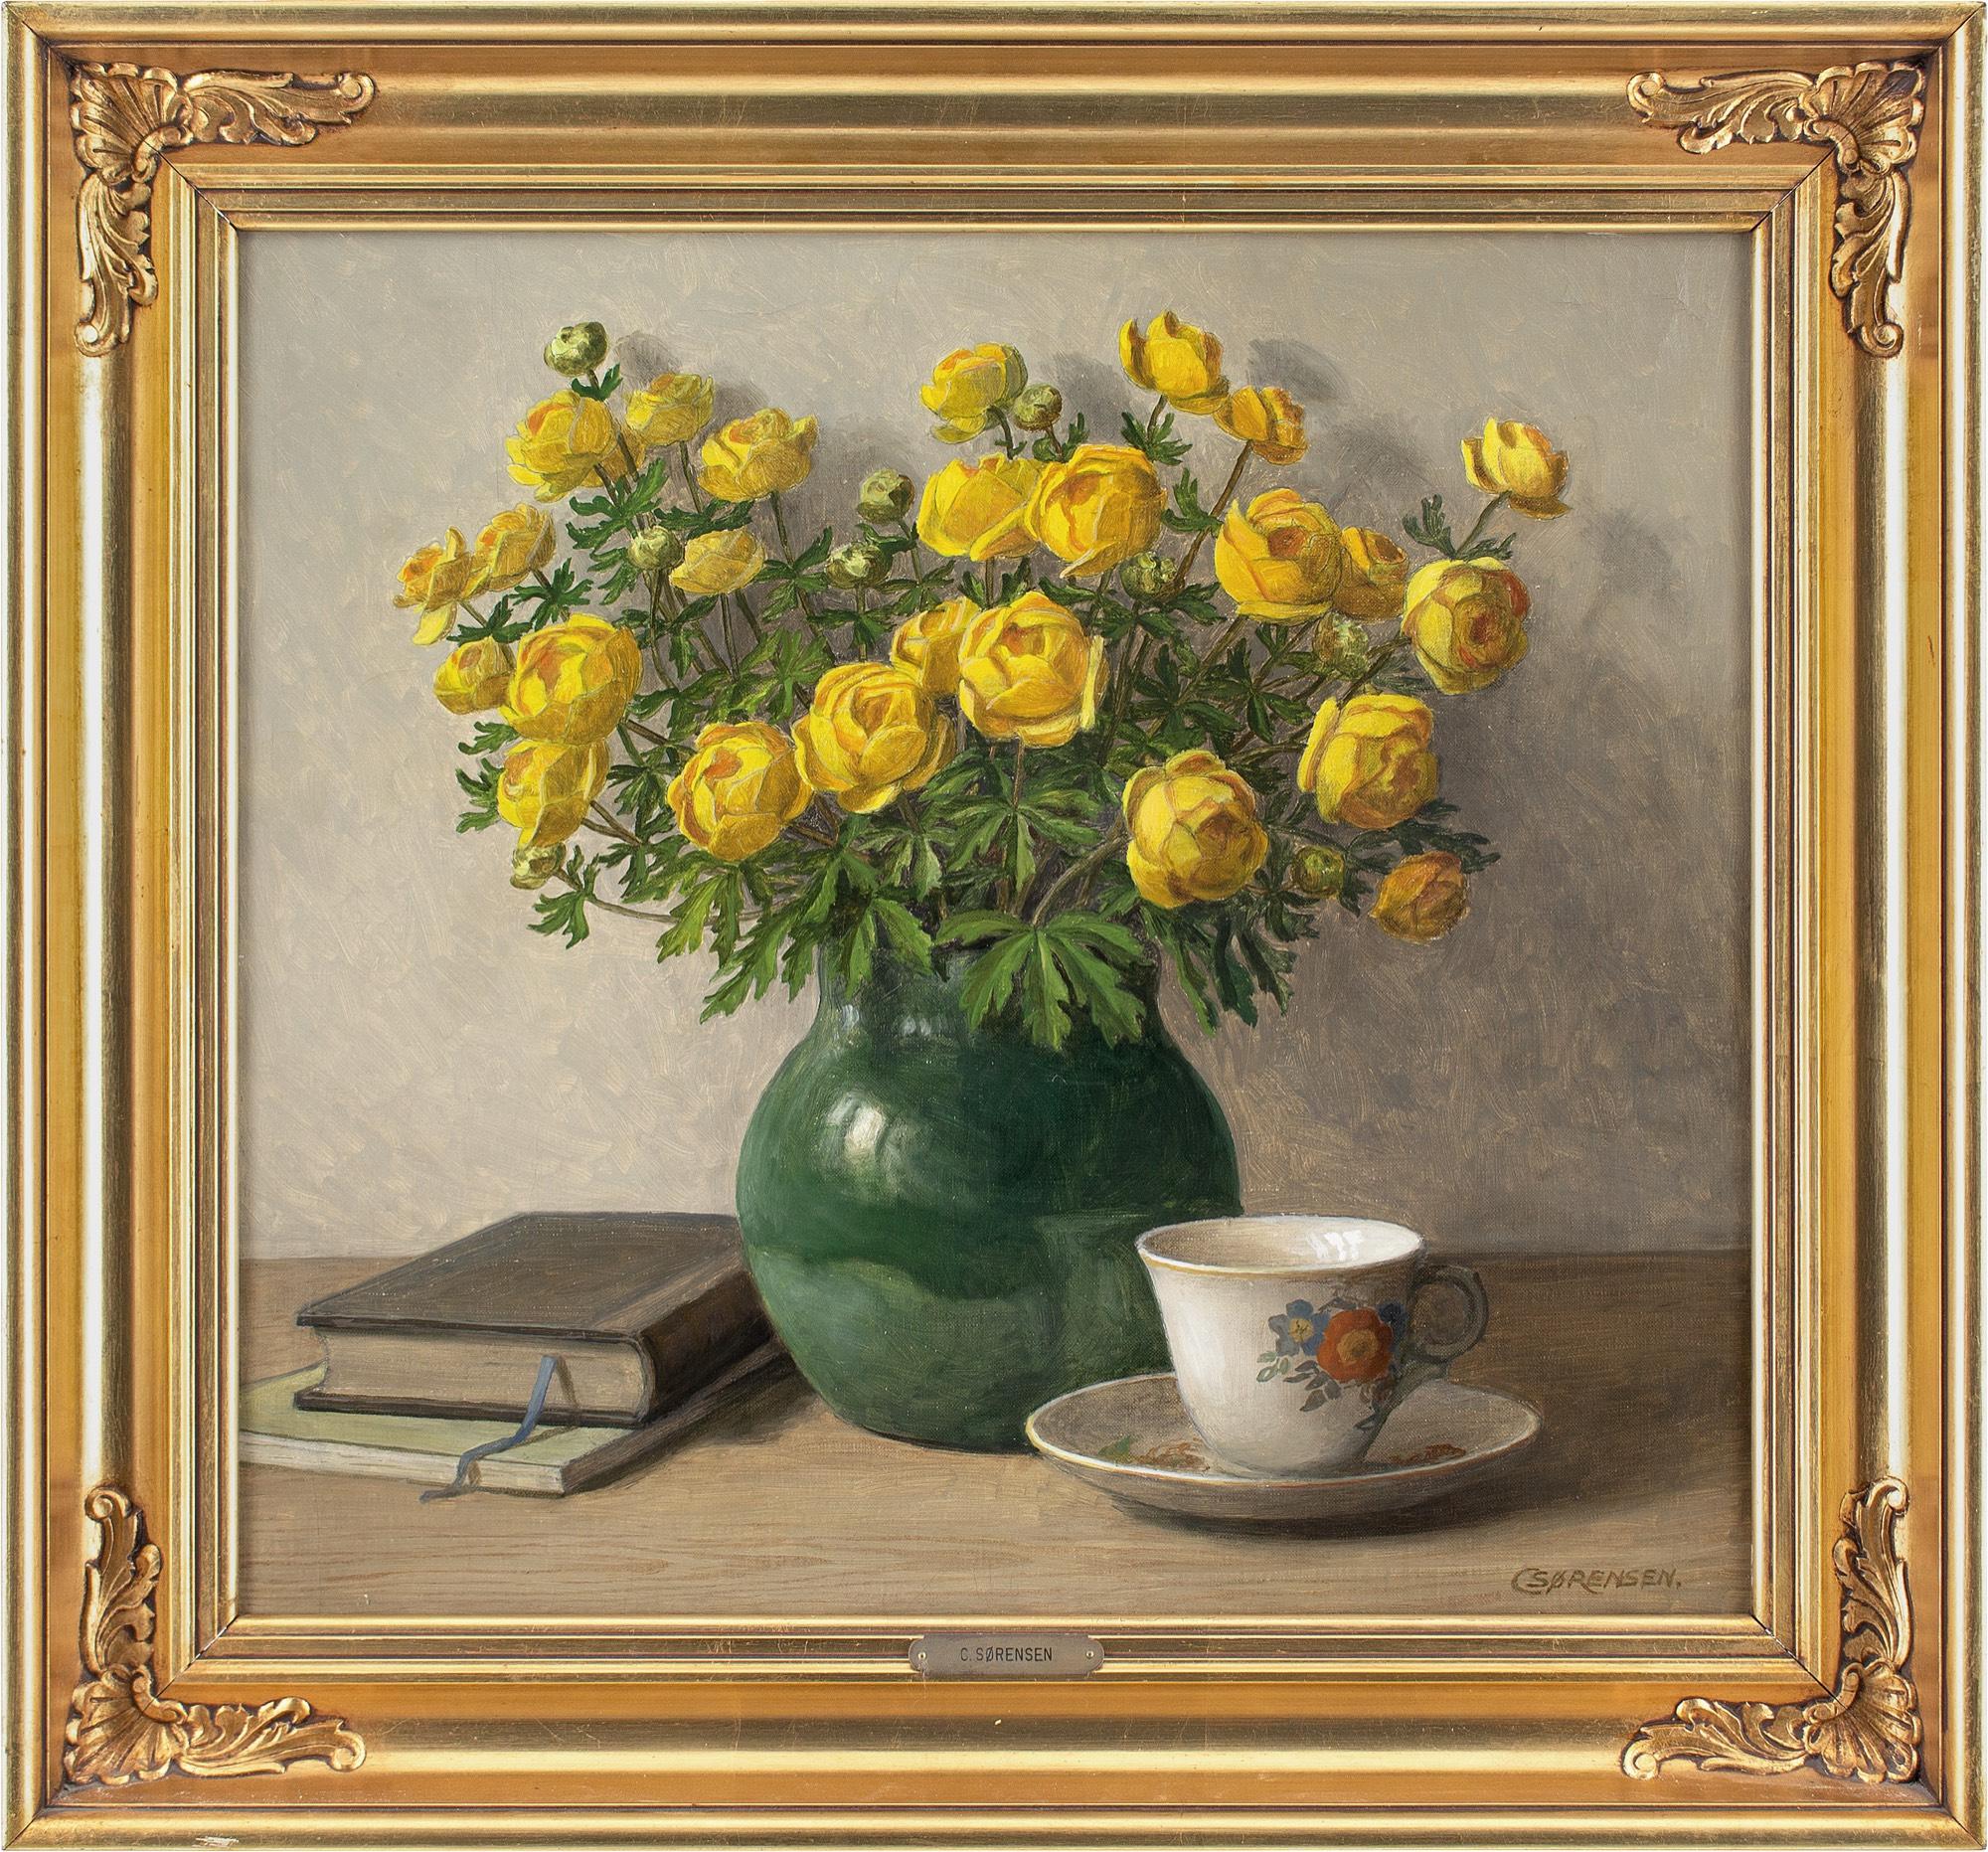 This charming early 20th-century oil painting by Danish artist C Sørensen depicts an arrangement of trollius with a vase, tea cup and books.

Little is known about C Sørensen, which is unusual given their evident skill. They worked predominantly